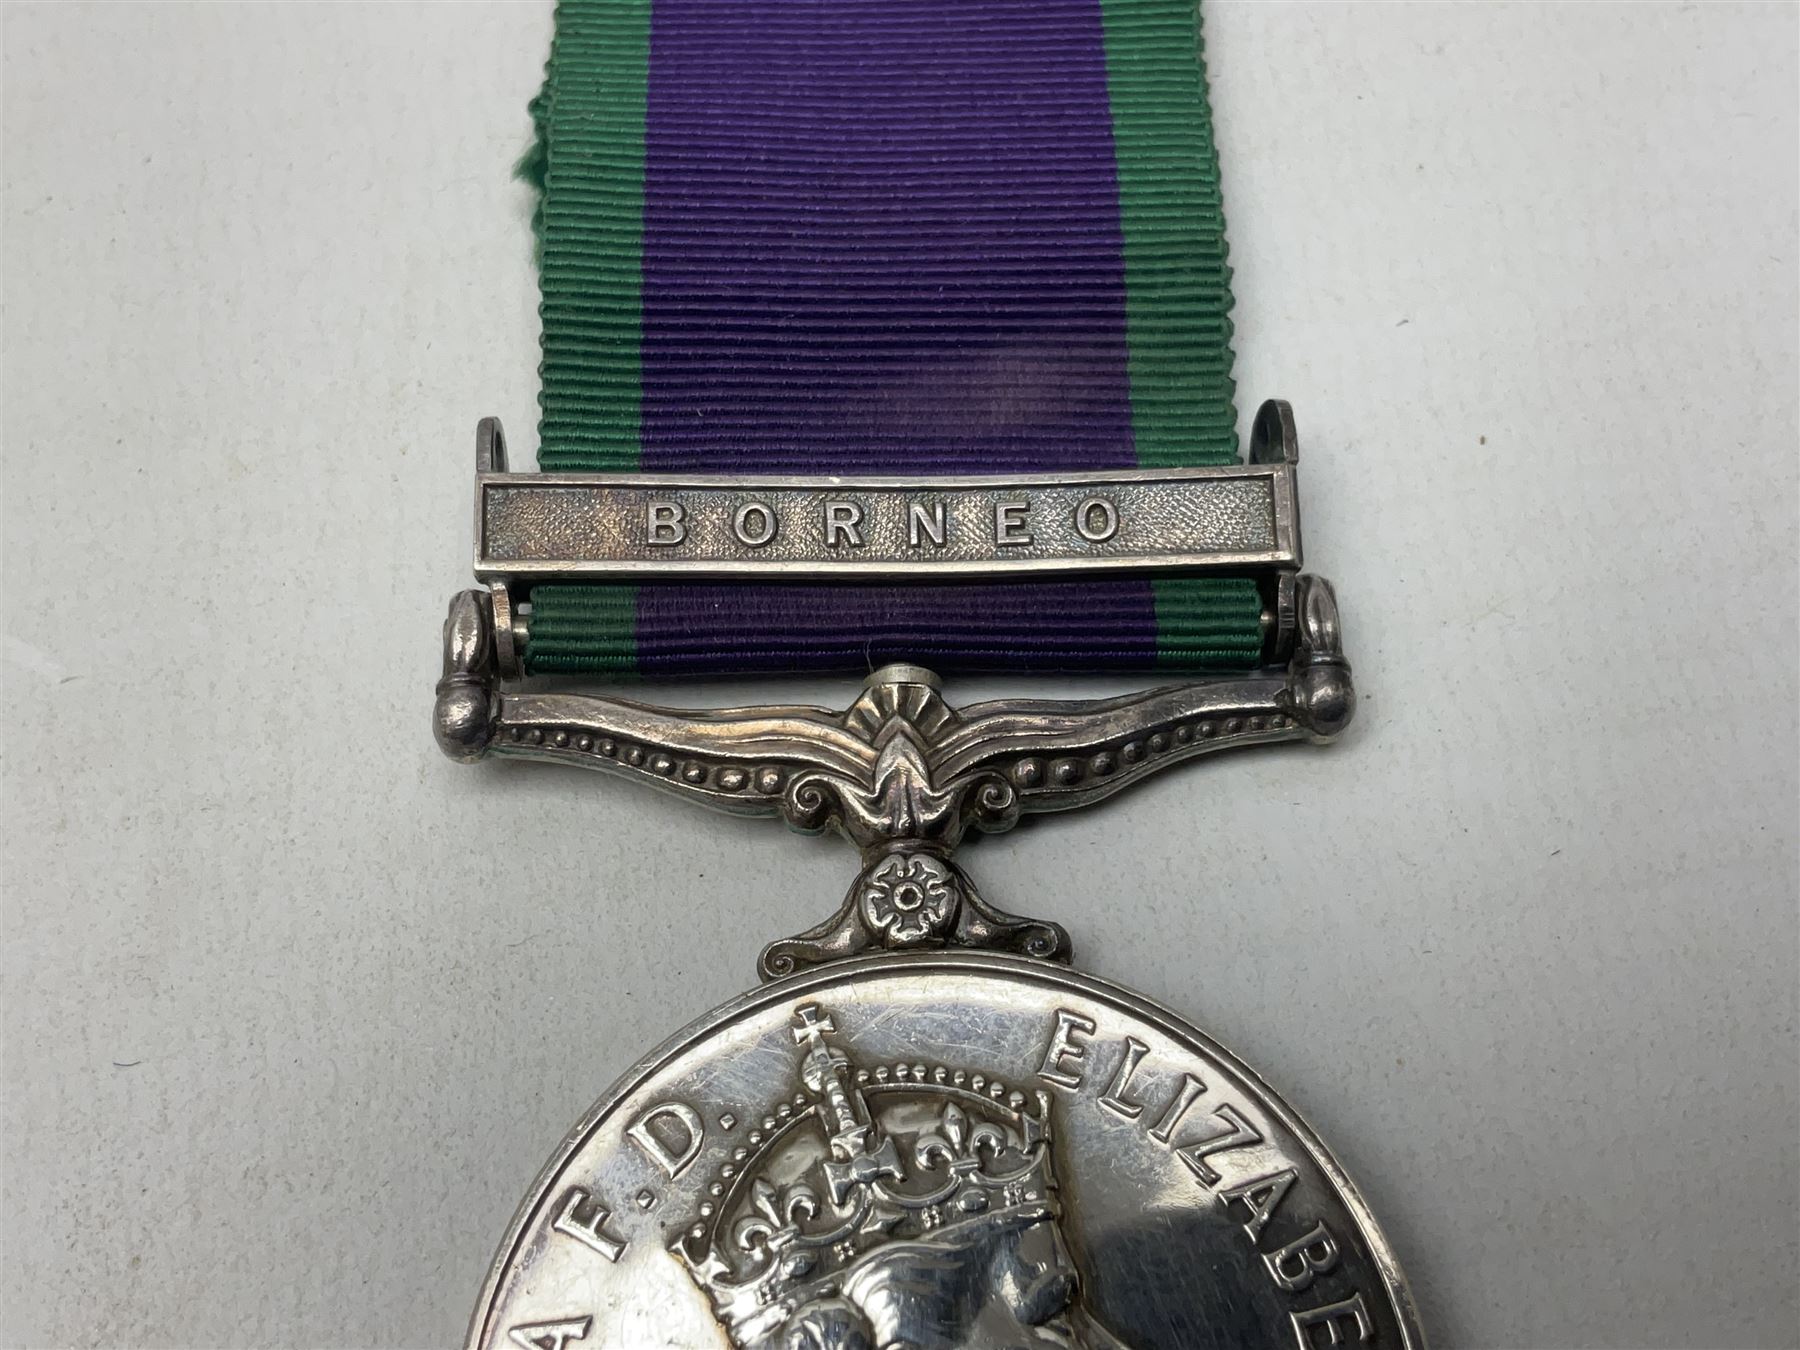 Elizabeth II General Service Medal with Borneo clasp awarded to 23919414 Pte. J.N. McKenna RAOC; wit - Image 5 of 6